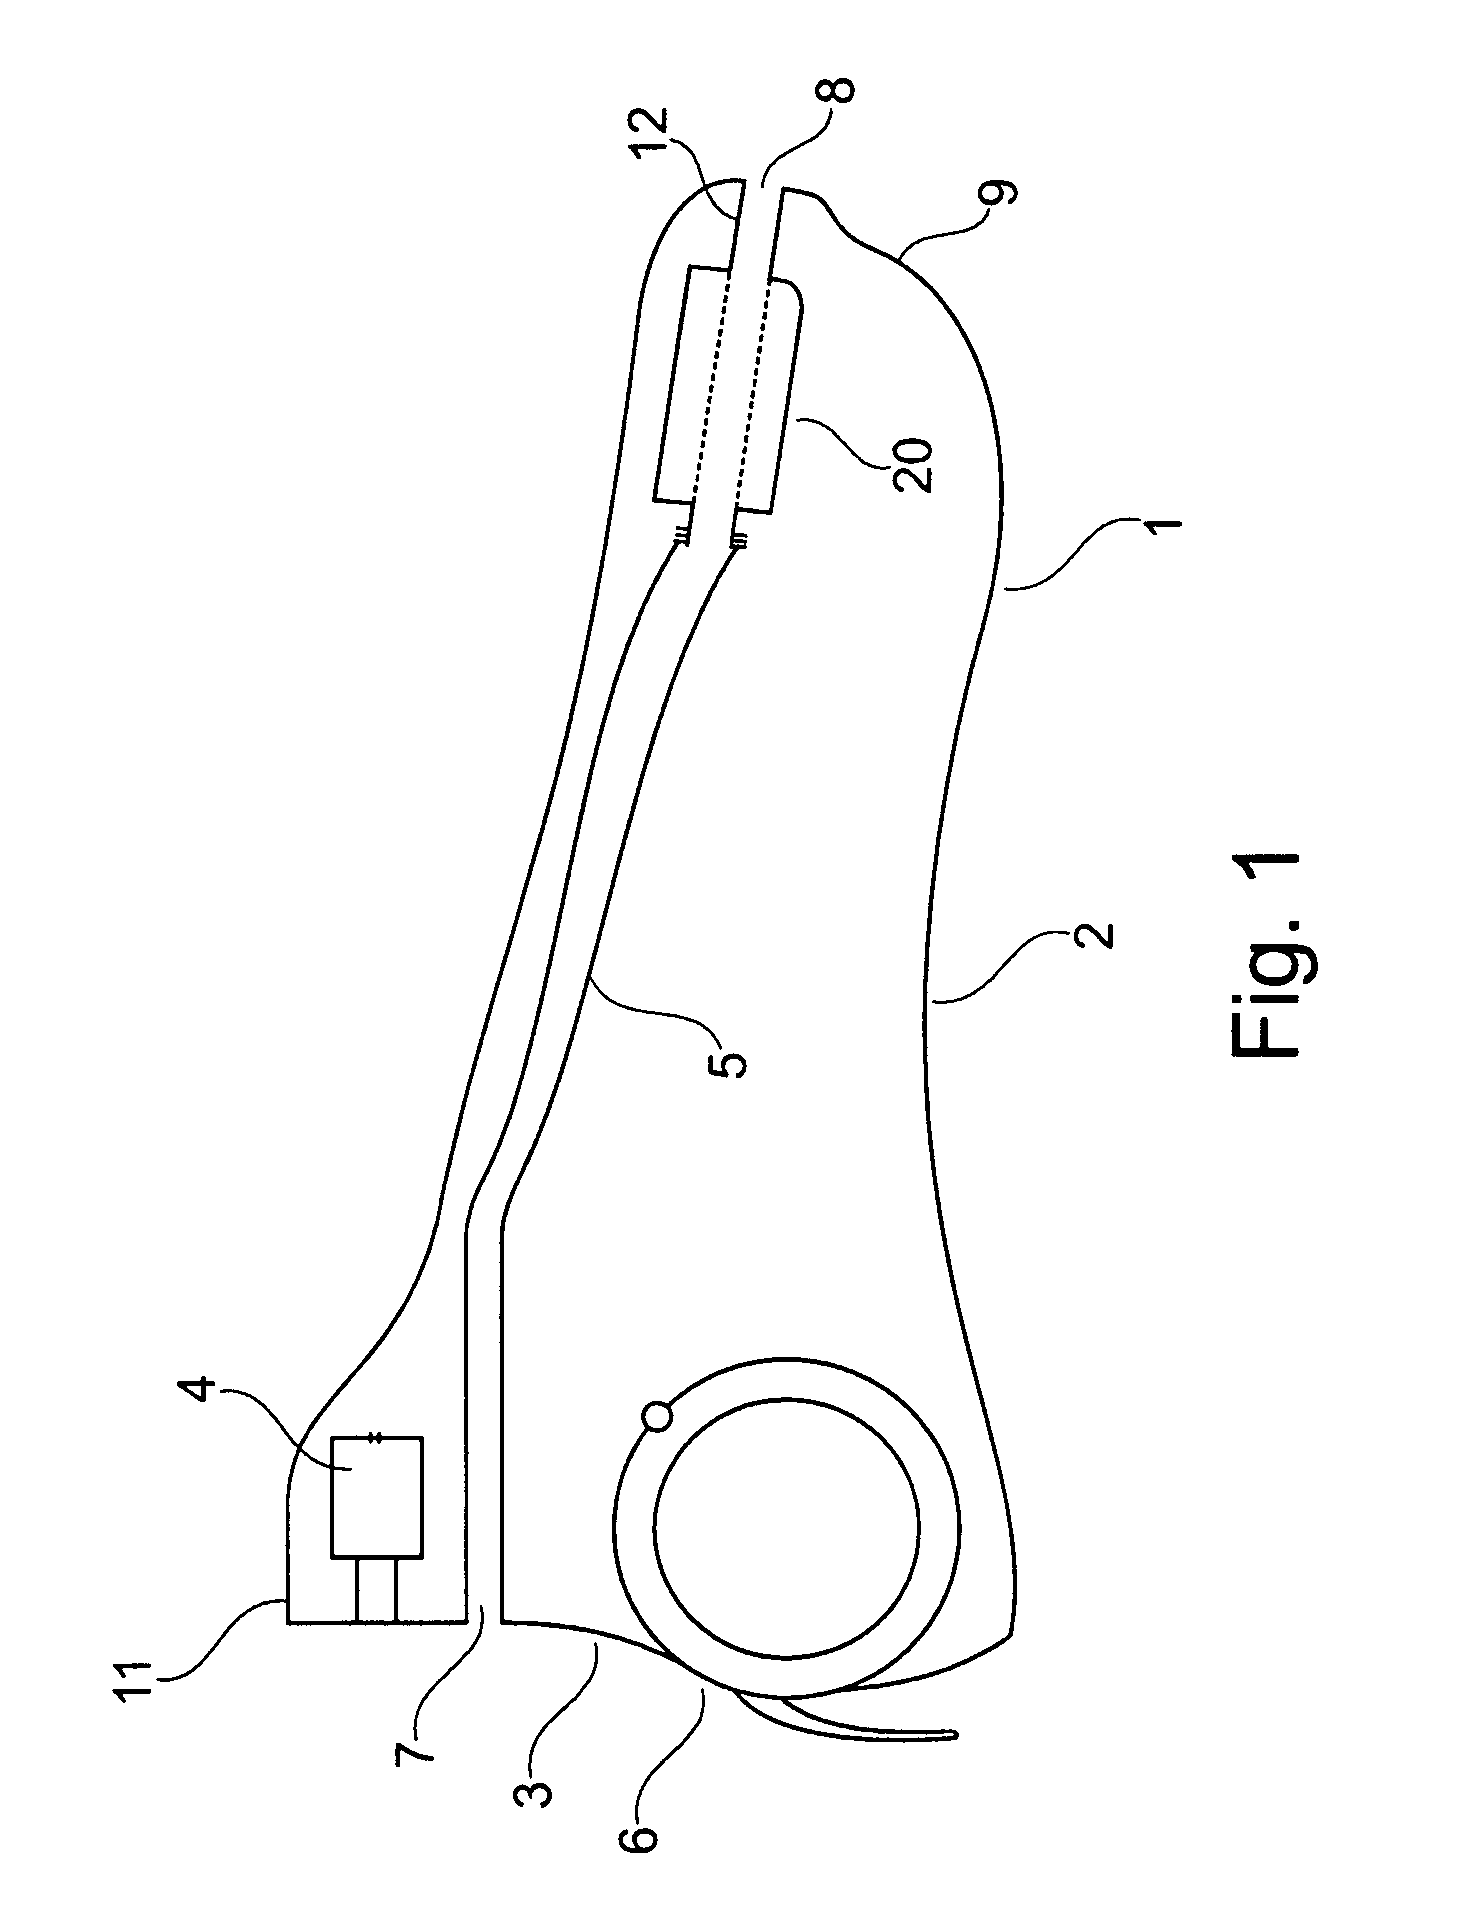 Hearing instrument with improved venting and miniature loudspeaker therefore